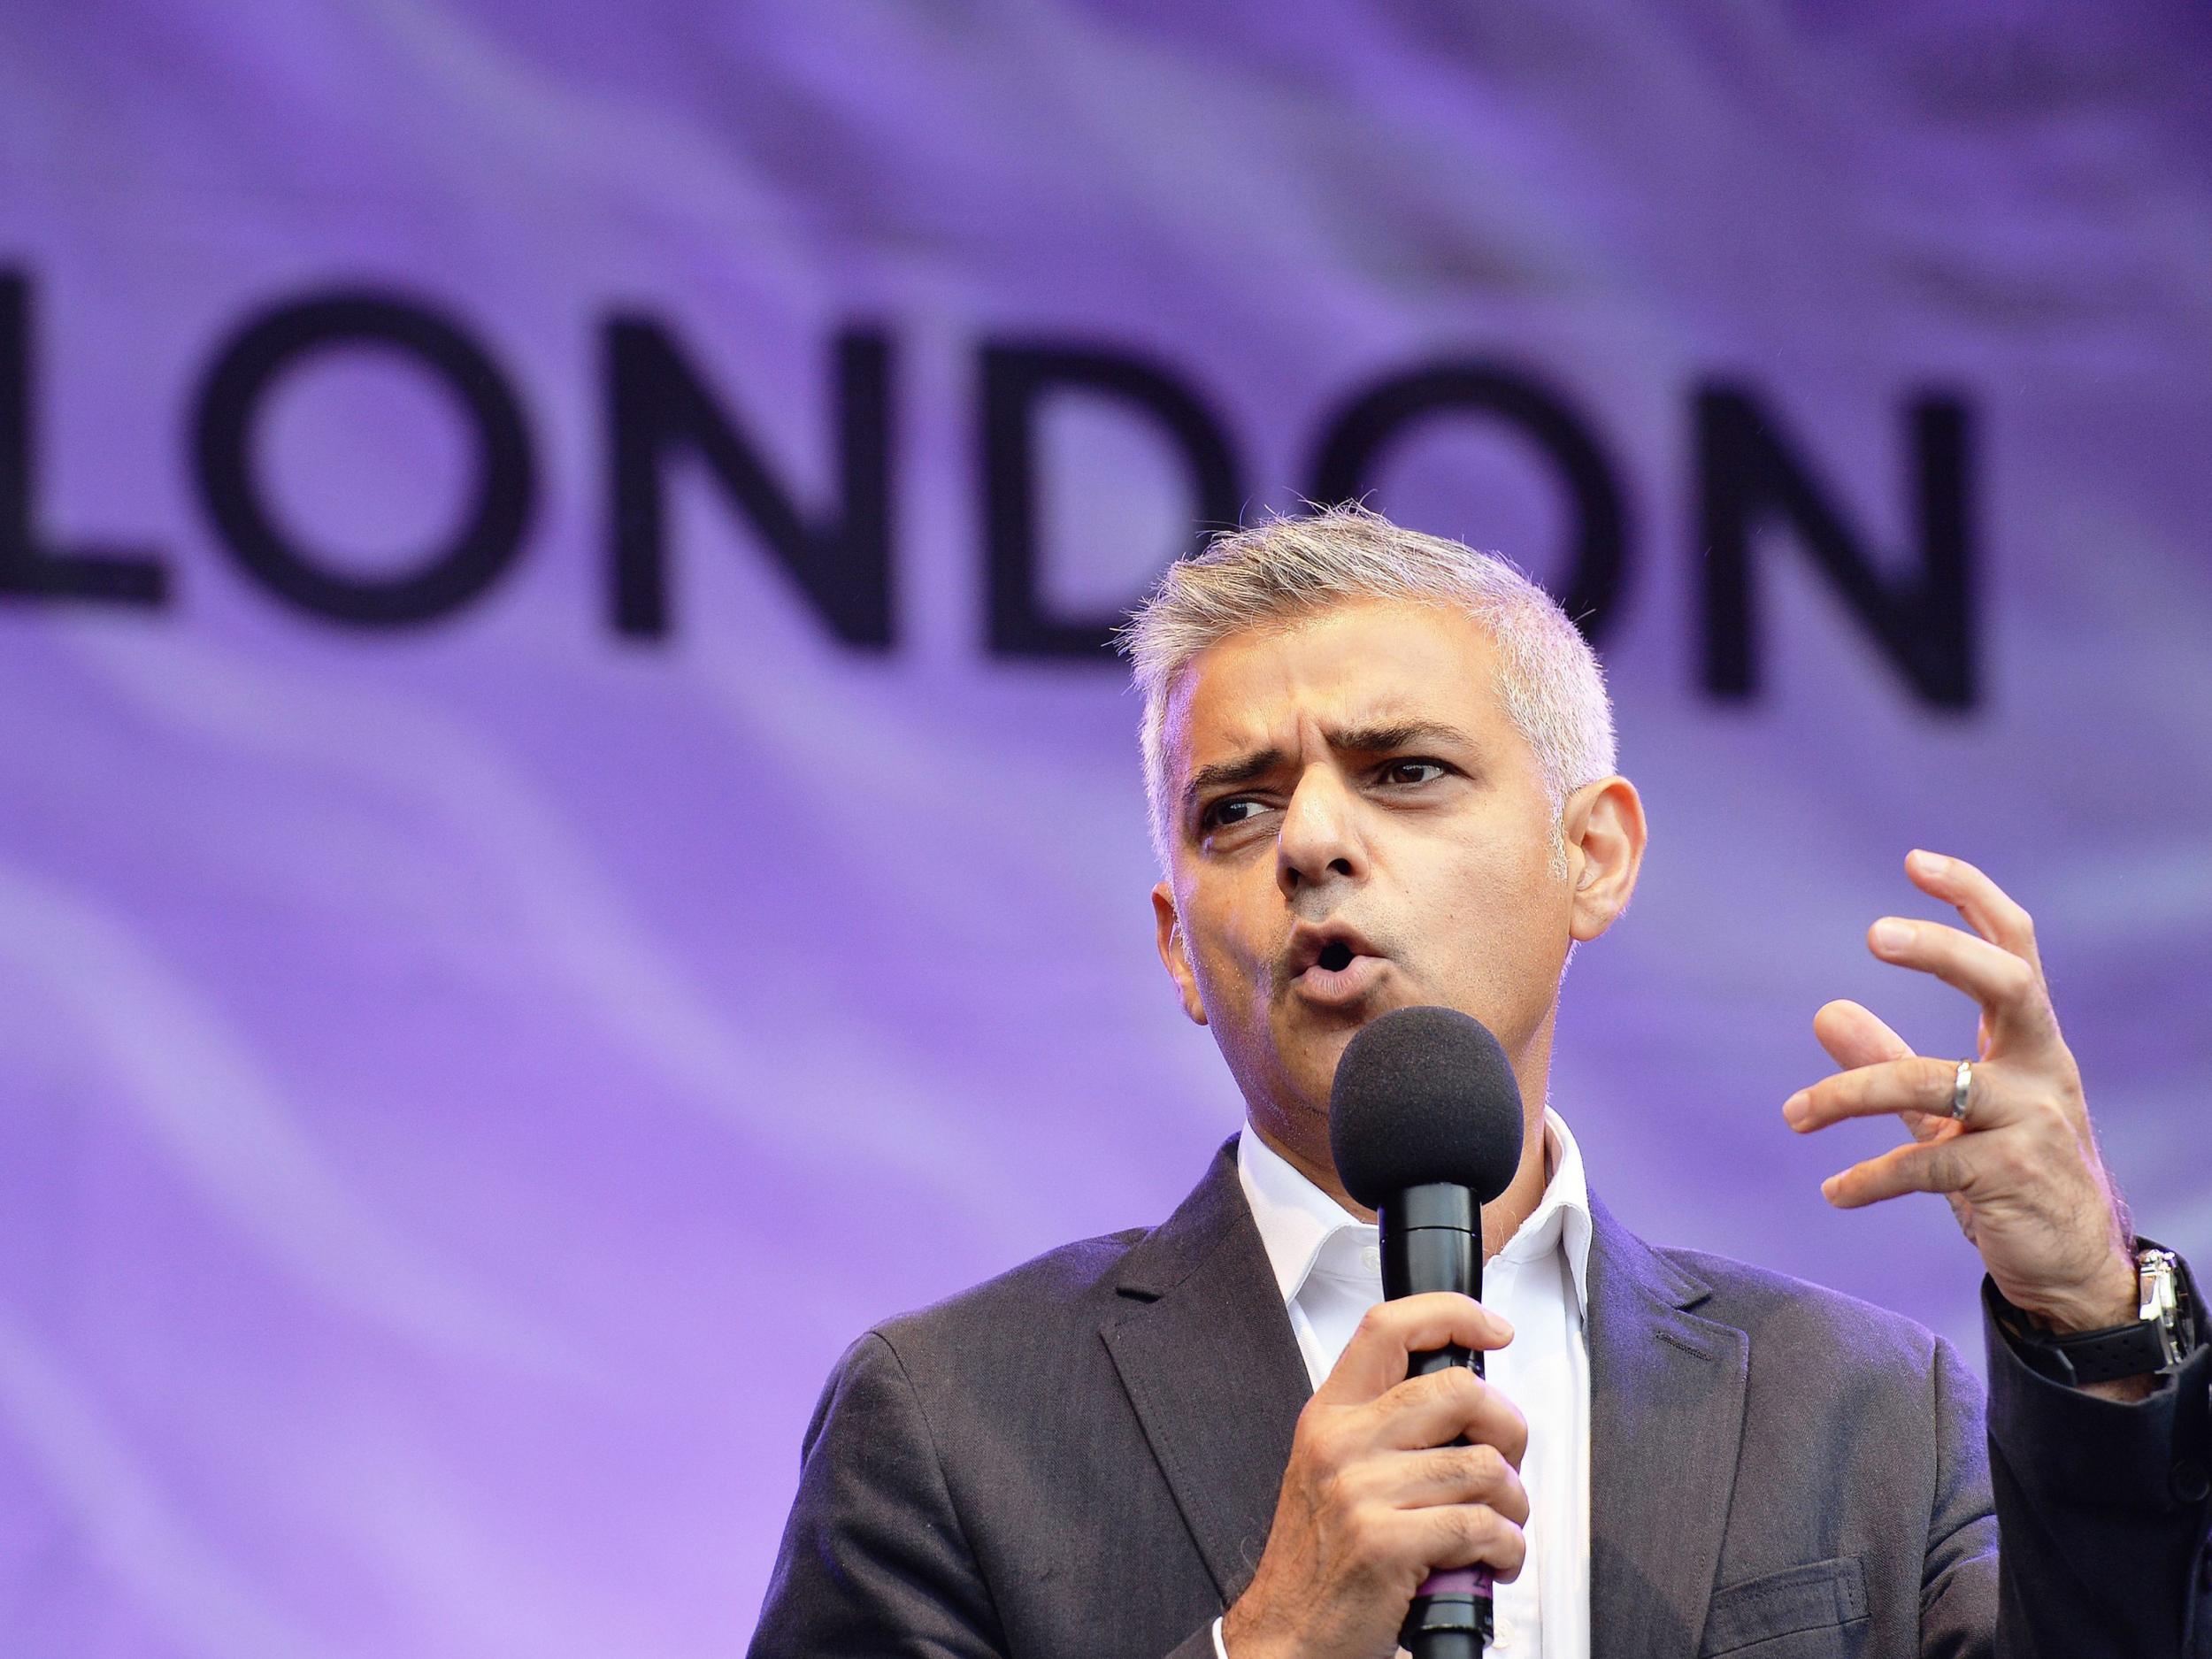 Khan called for a diesel scrapping scheme